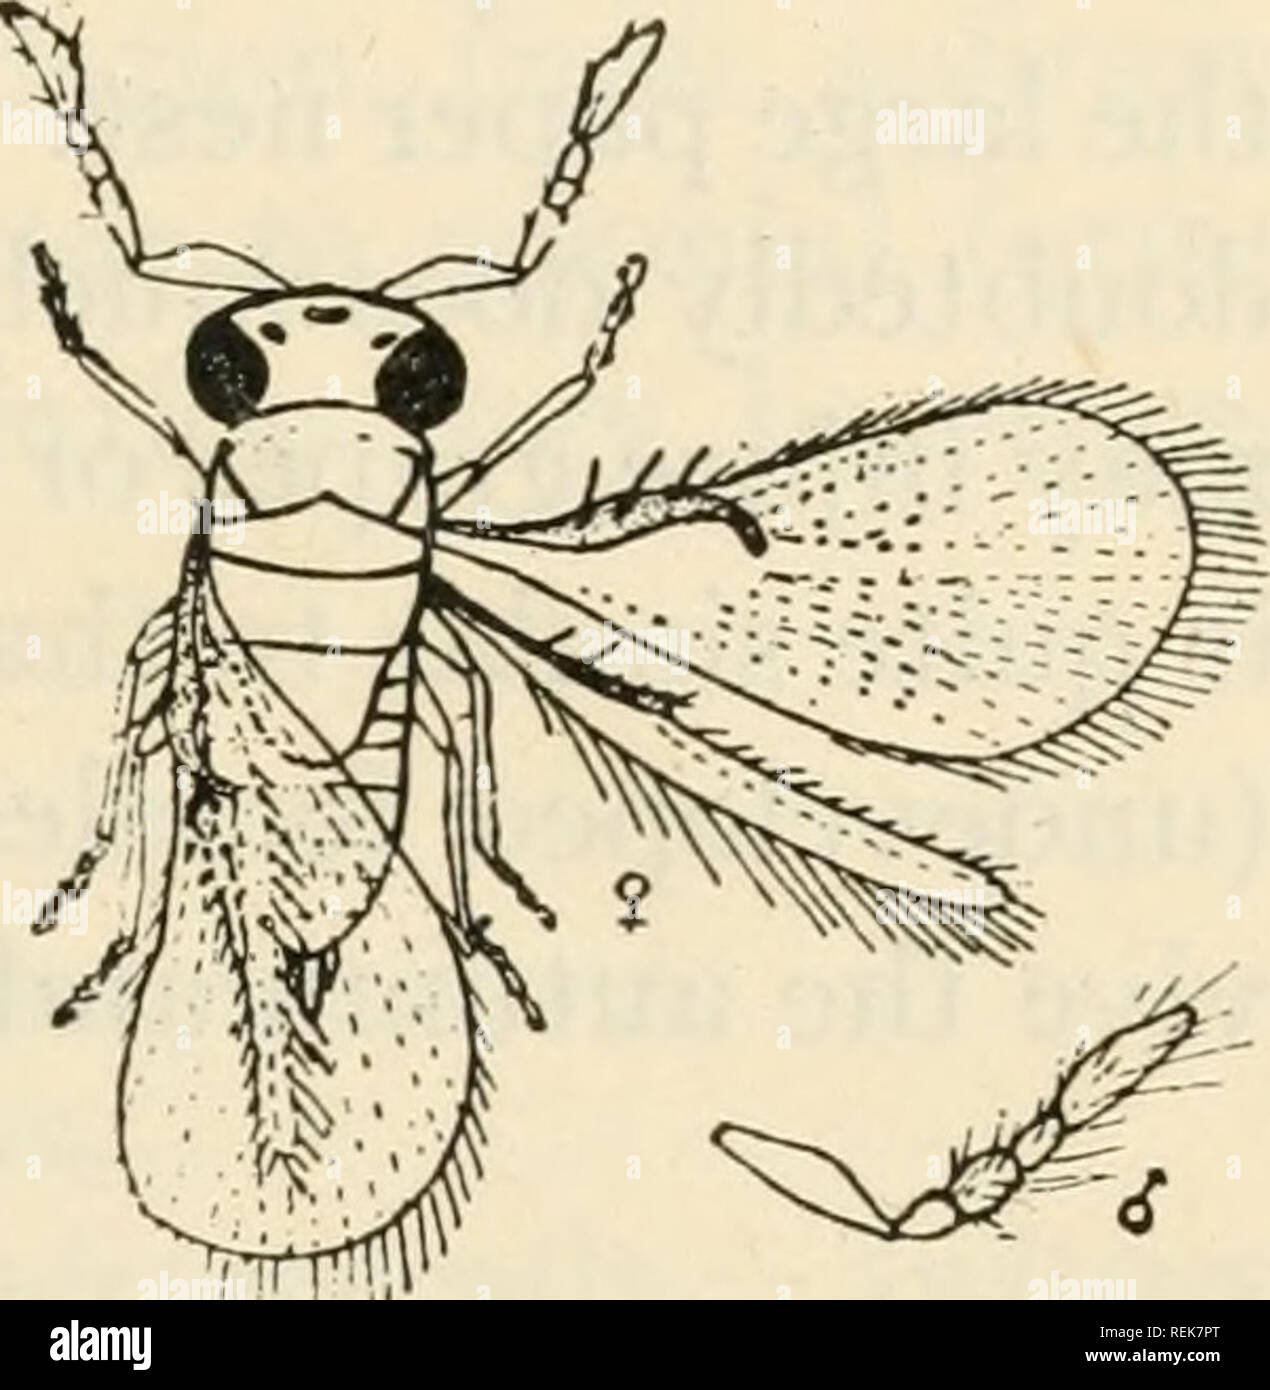 . Class book of economic entomology. Insects, Injurious and beneficial. [from old catalog]; Insects; Insects. CLASSIFICATION AND DESCRIPTION OF COMMON INSECTS 355 B. Pronotal spot minute.—hordei. BB, Pronotal spot large, distinct. C. Second abdominal segment longer than fourth and fifth together.— secale. CC. Second abdominal segment shorter than fourth and fifth together. —tritici. Apple Seed Chalcid (Syntomaspis druparum Boh.).—An introduced insect from Europe. Well distributed in the Northern States. Causes deformities and corky discolored streaks in the fruit when repeated puncturing occur Stock Photo